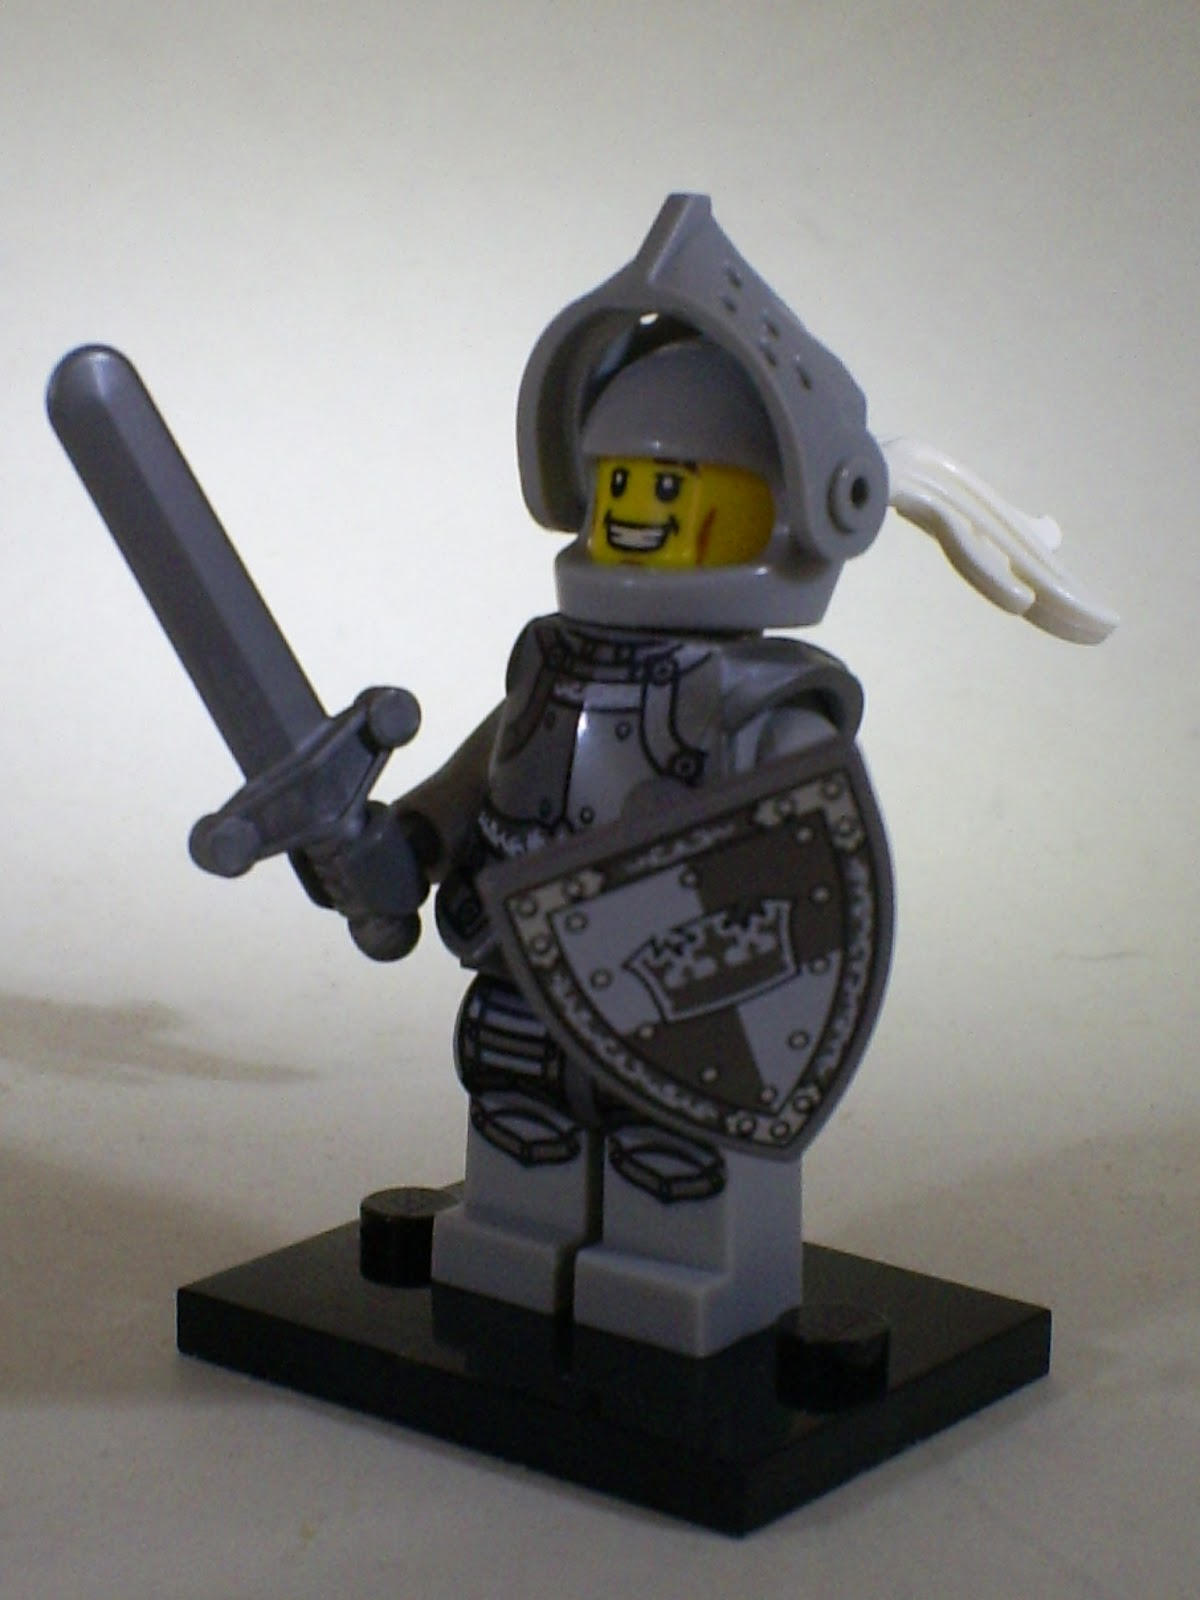 2013 LEGO Minifigures Series 9 Heroic Knight Review - Bricks and Bloks